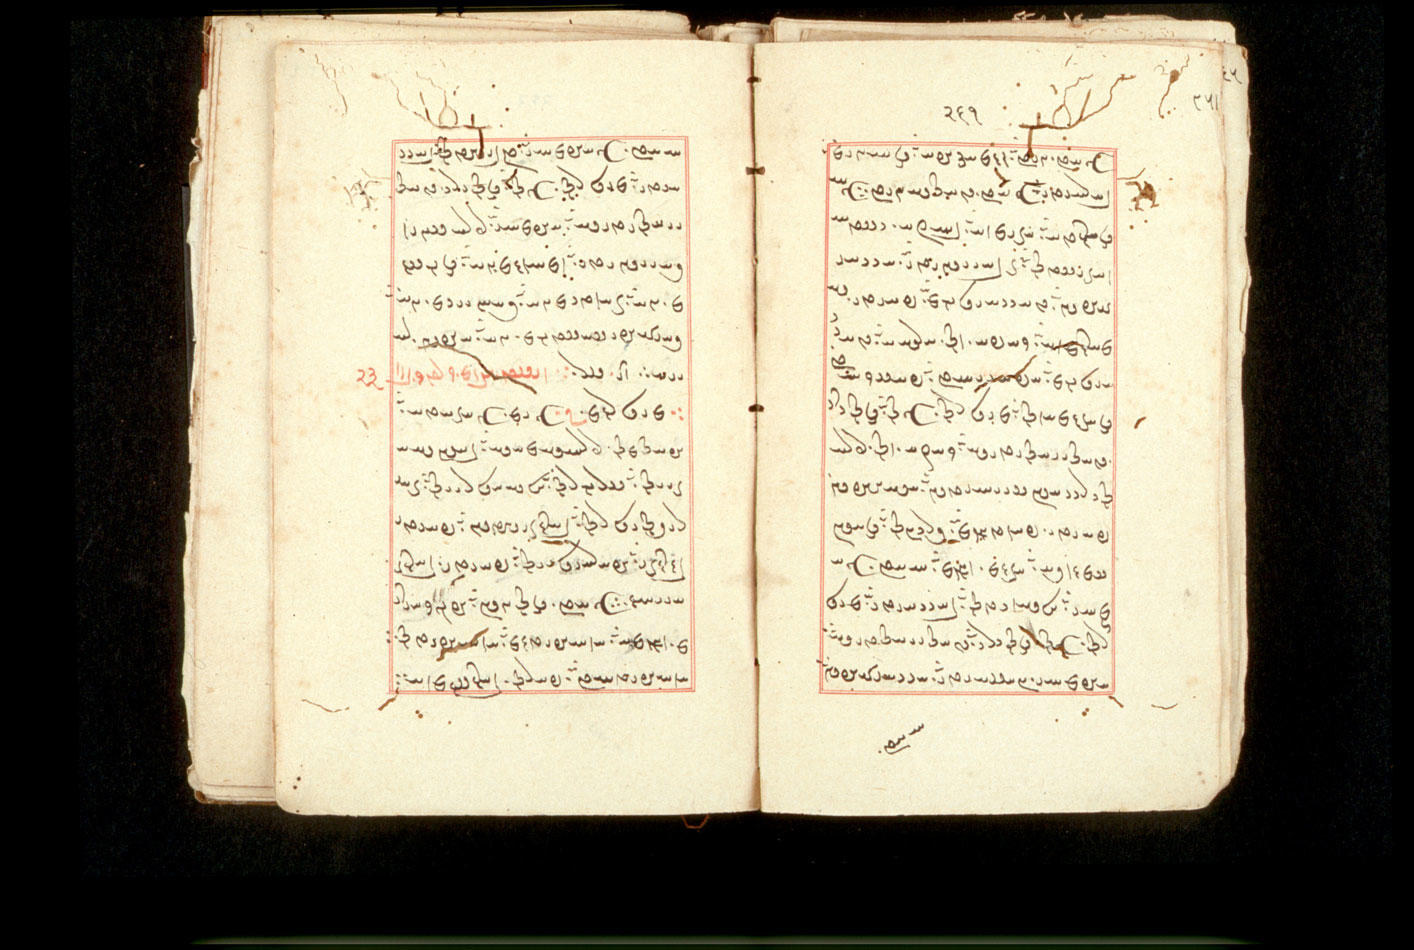 Folios 261v (right) and 262r (left)